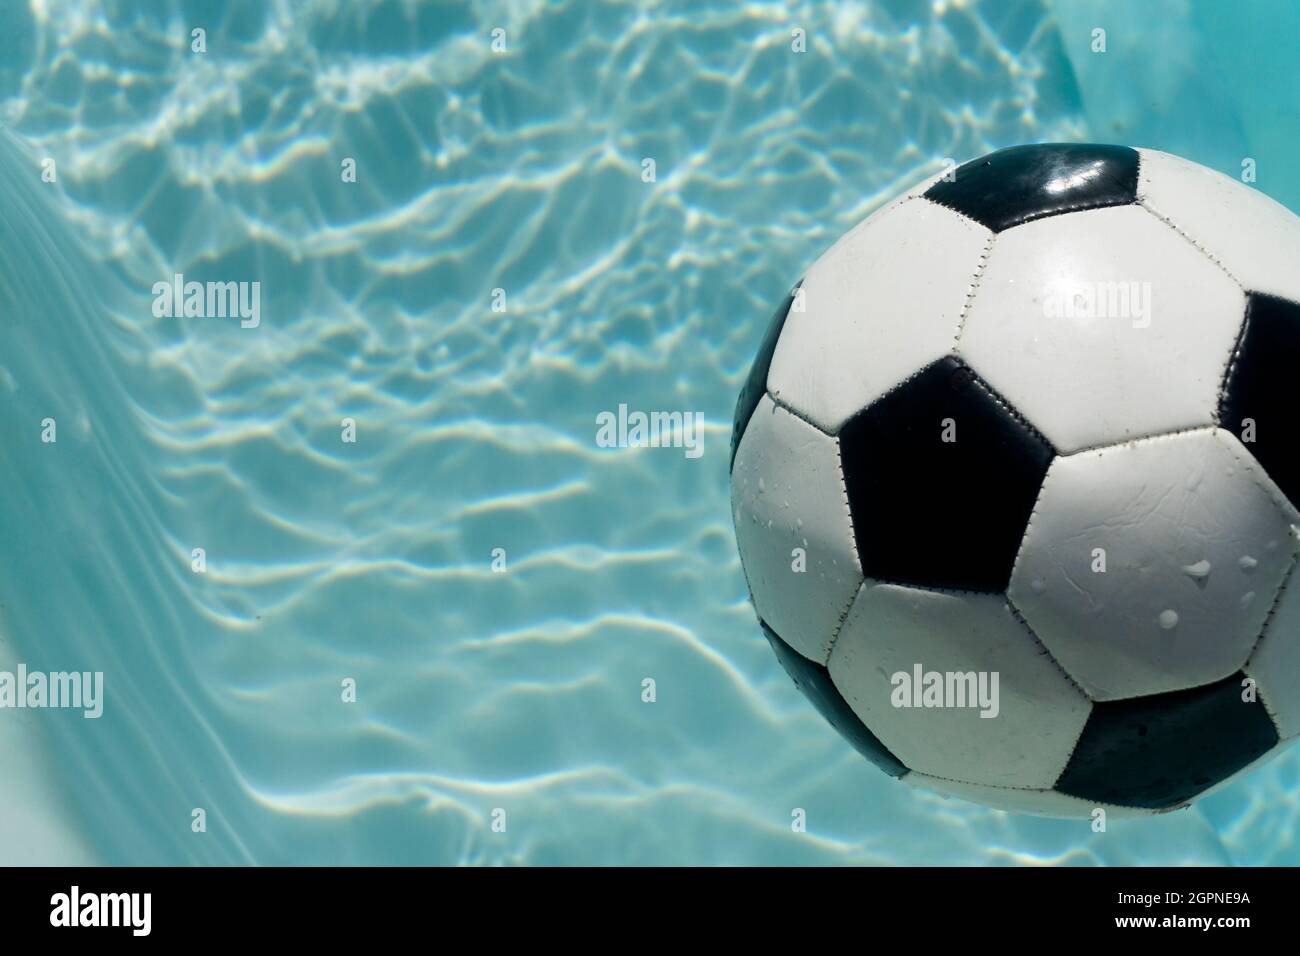 Black and white soccer football floating in a blue clear swimming pool. Summer sport background Stock Photo